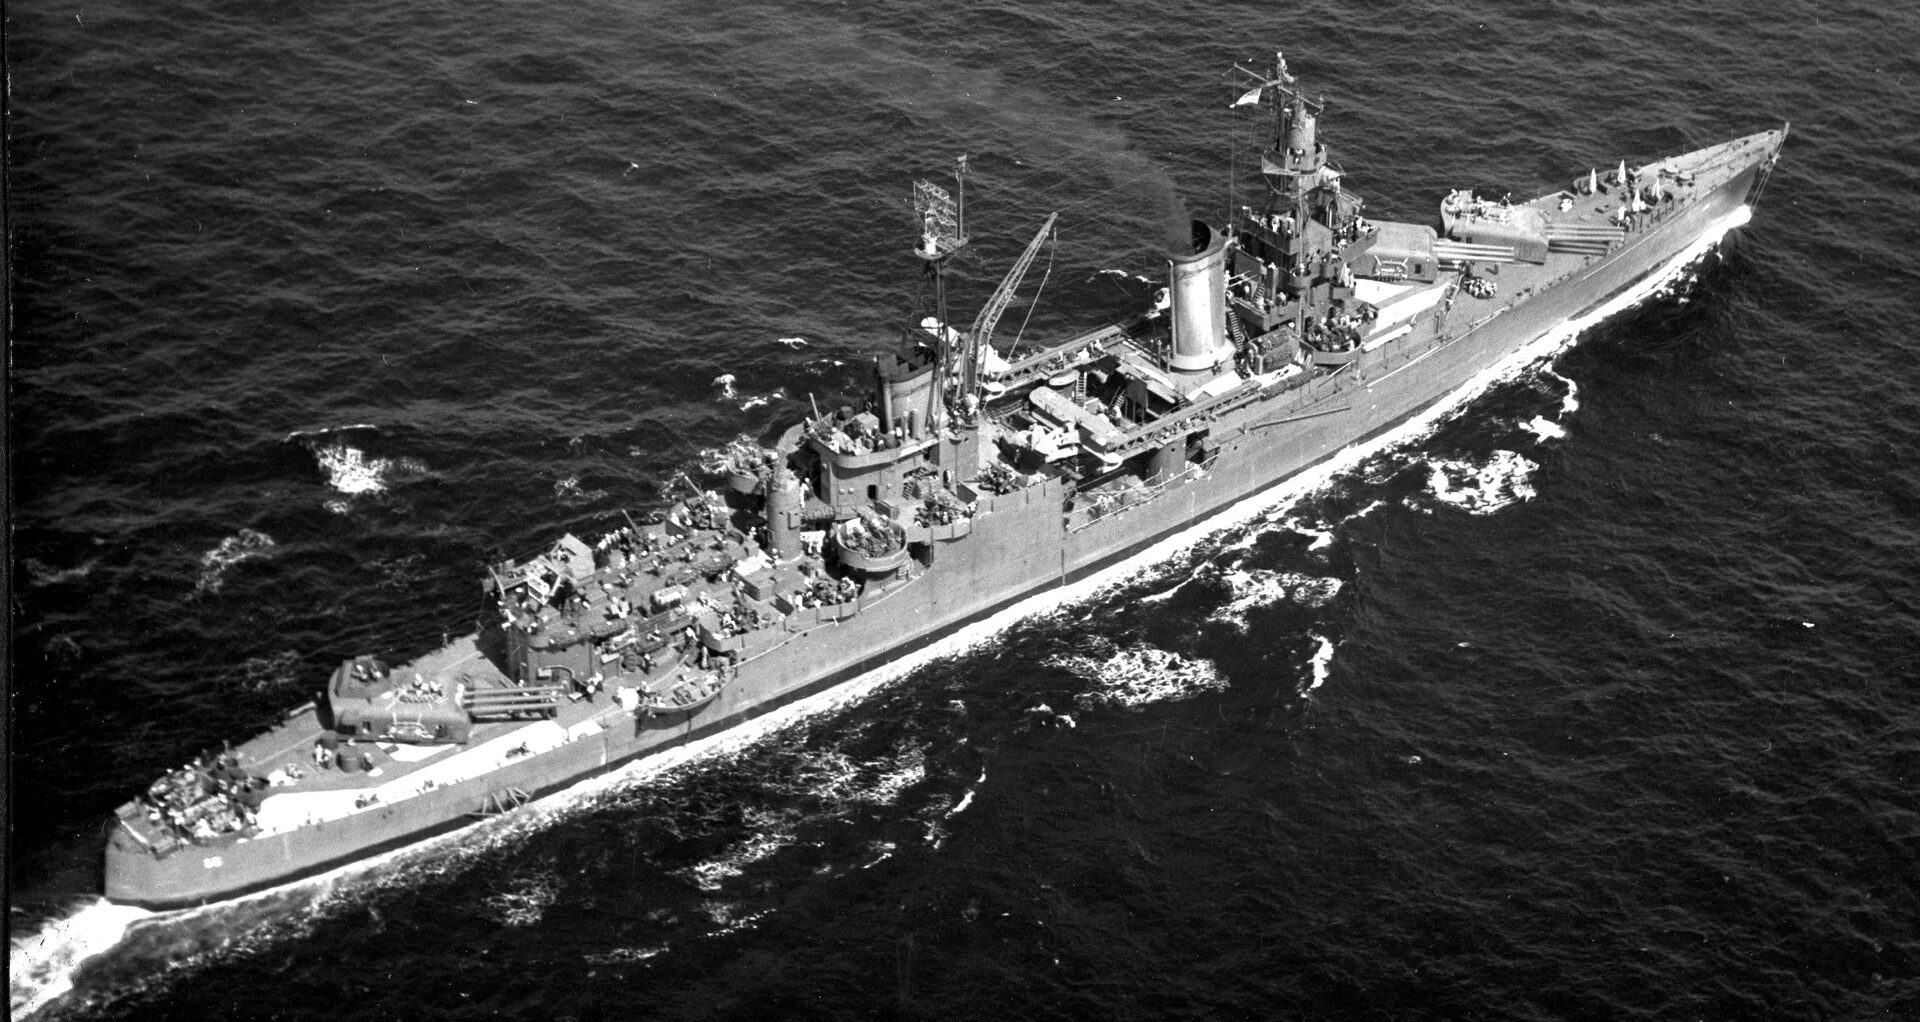 The heavy cruiser USS Indianapolis (CA-35), photographed during the war, was launched in 1931 and earned 10 battle stars before her tragic sinking.